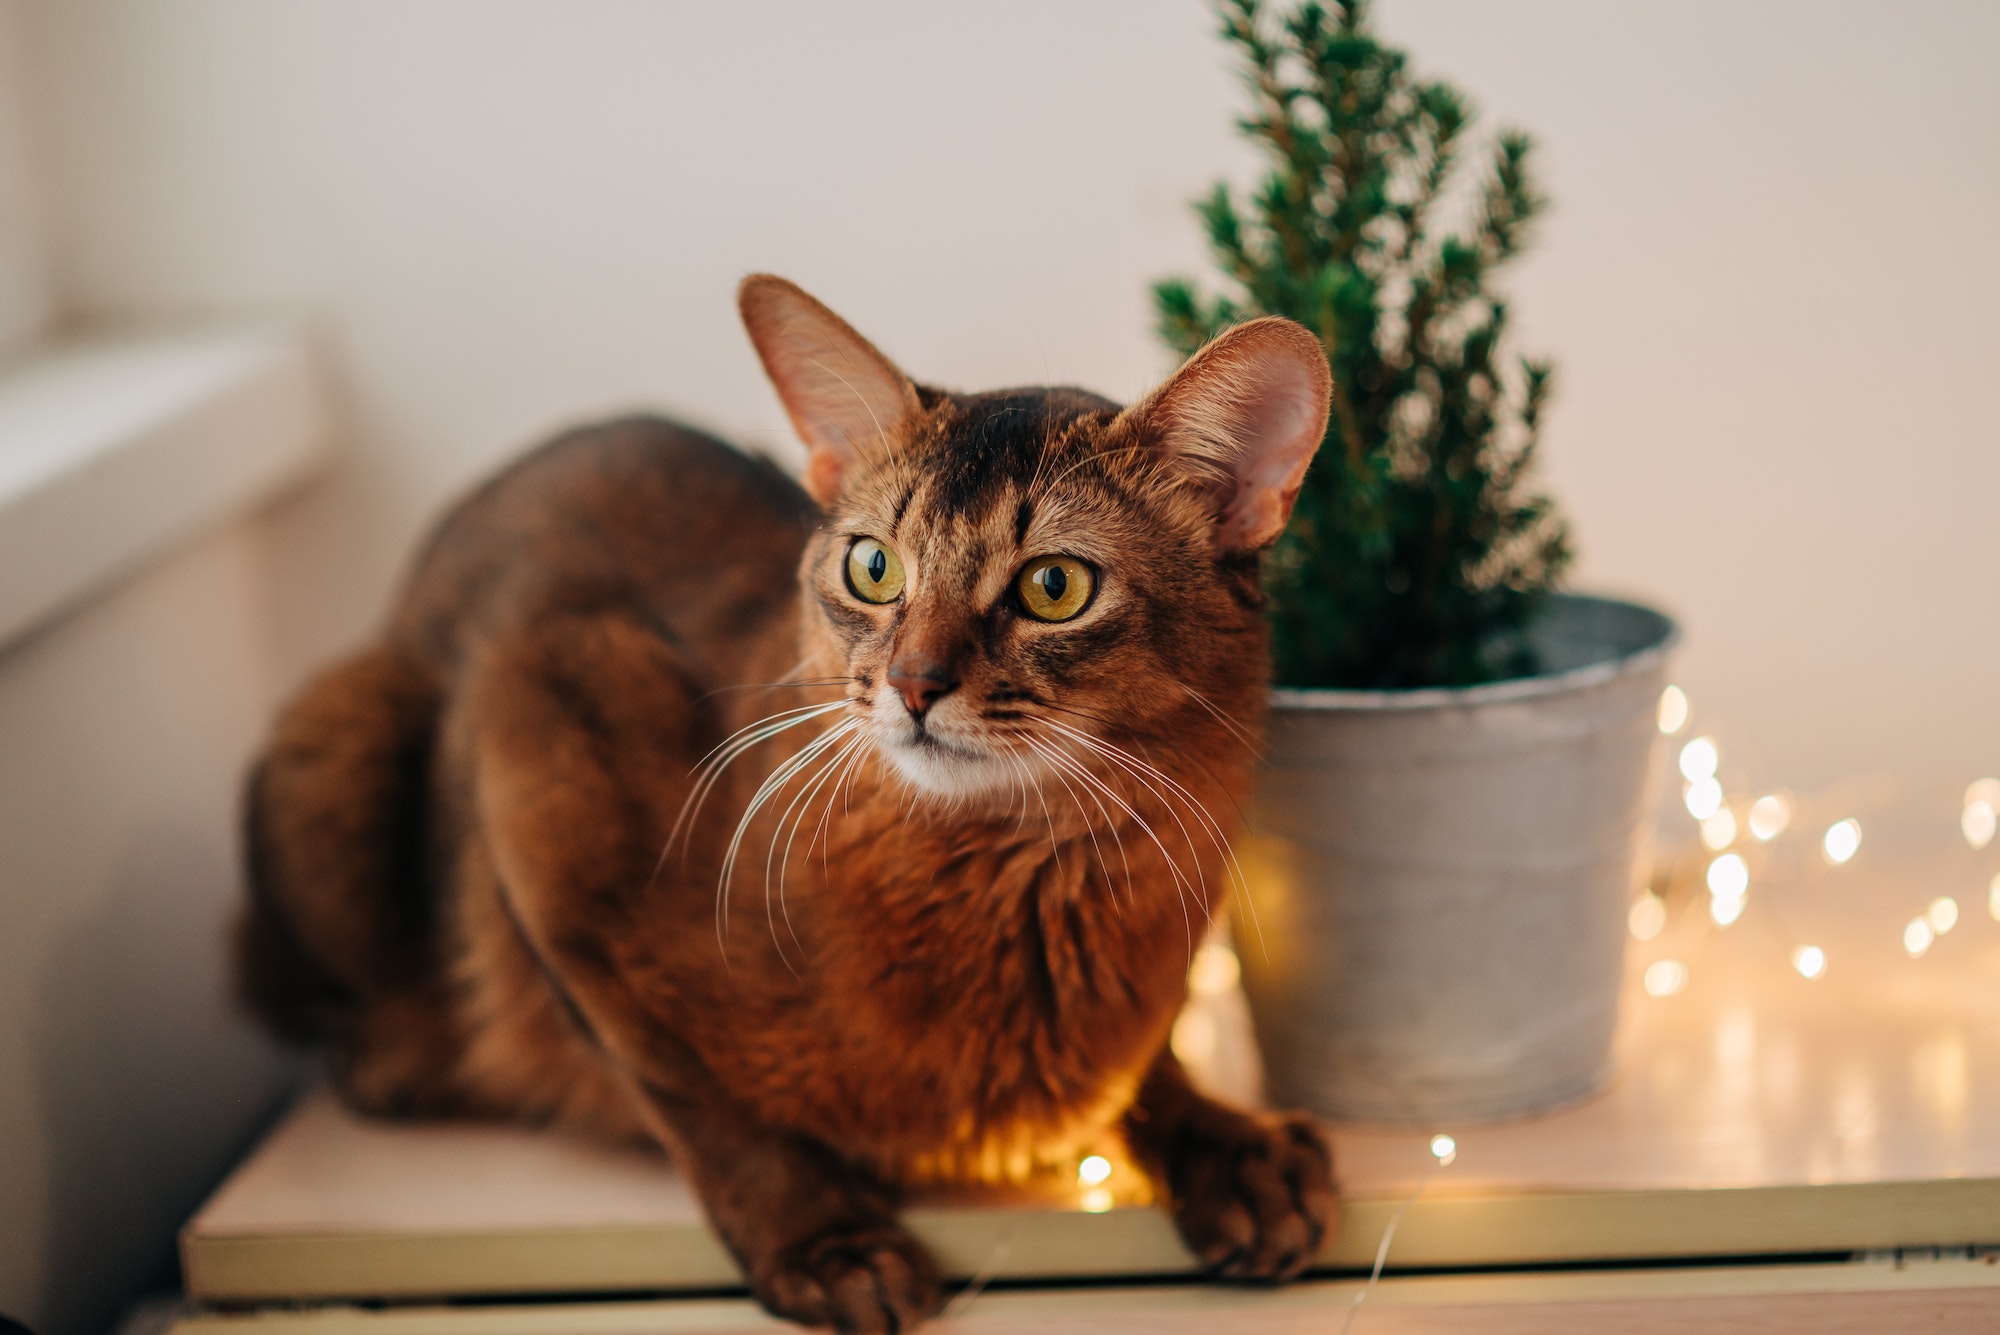 Red cat Somali breed at home indoors with Christmas winter holiday decorations near the window